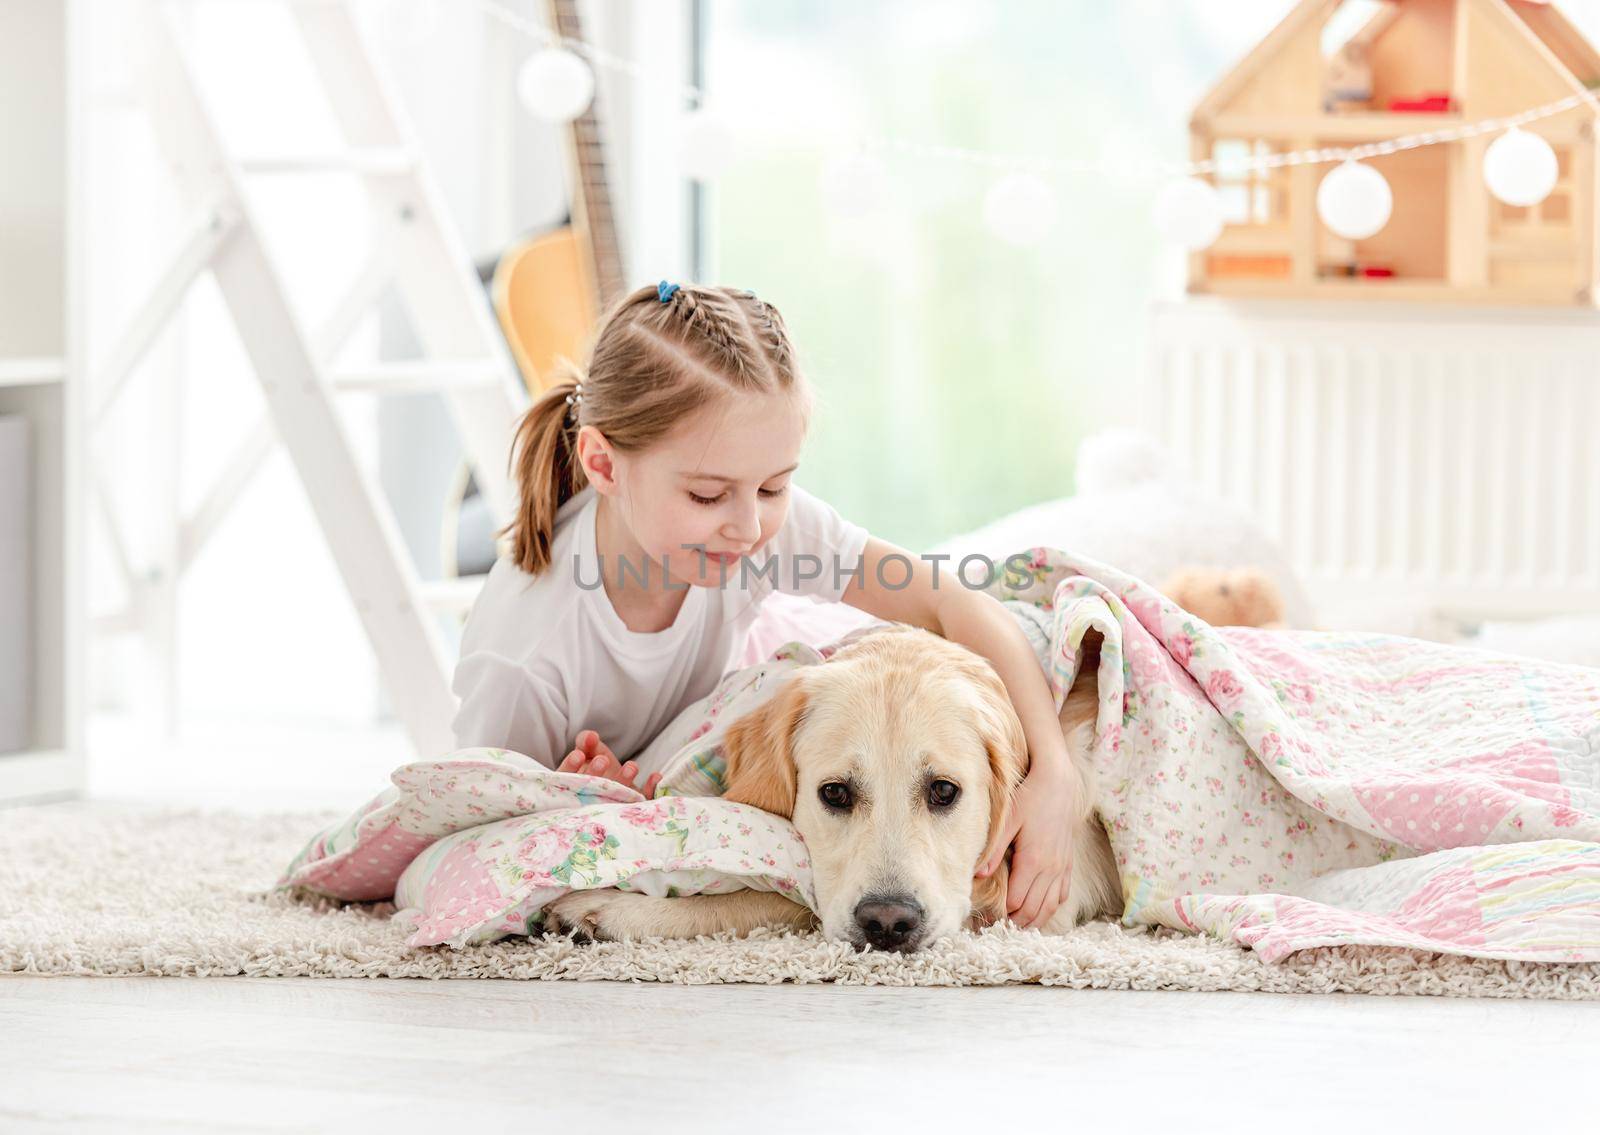 Beautiful little girl covering cute dog with blanket on floor in playroom